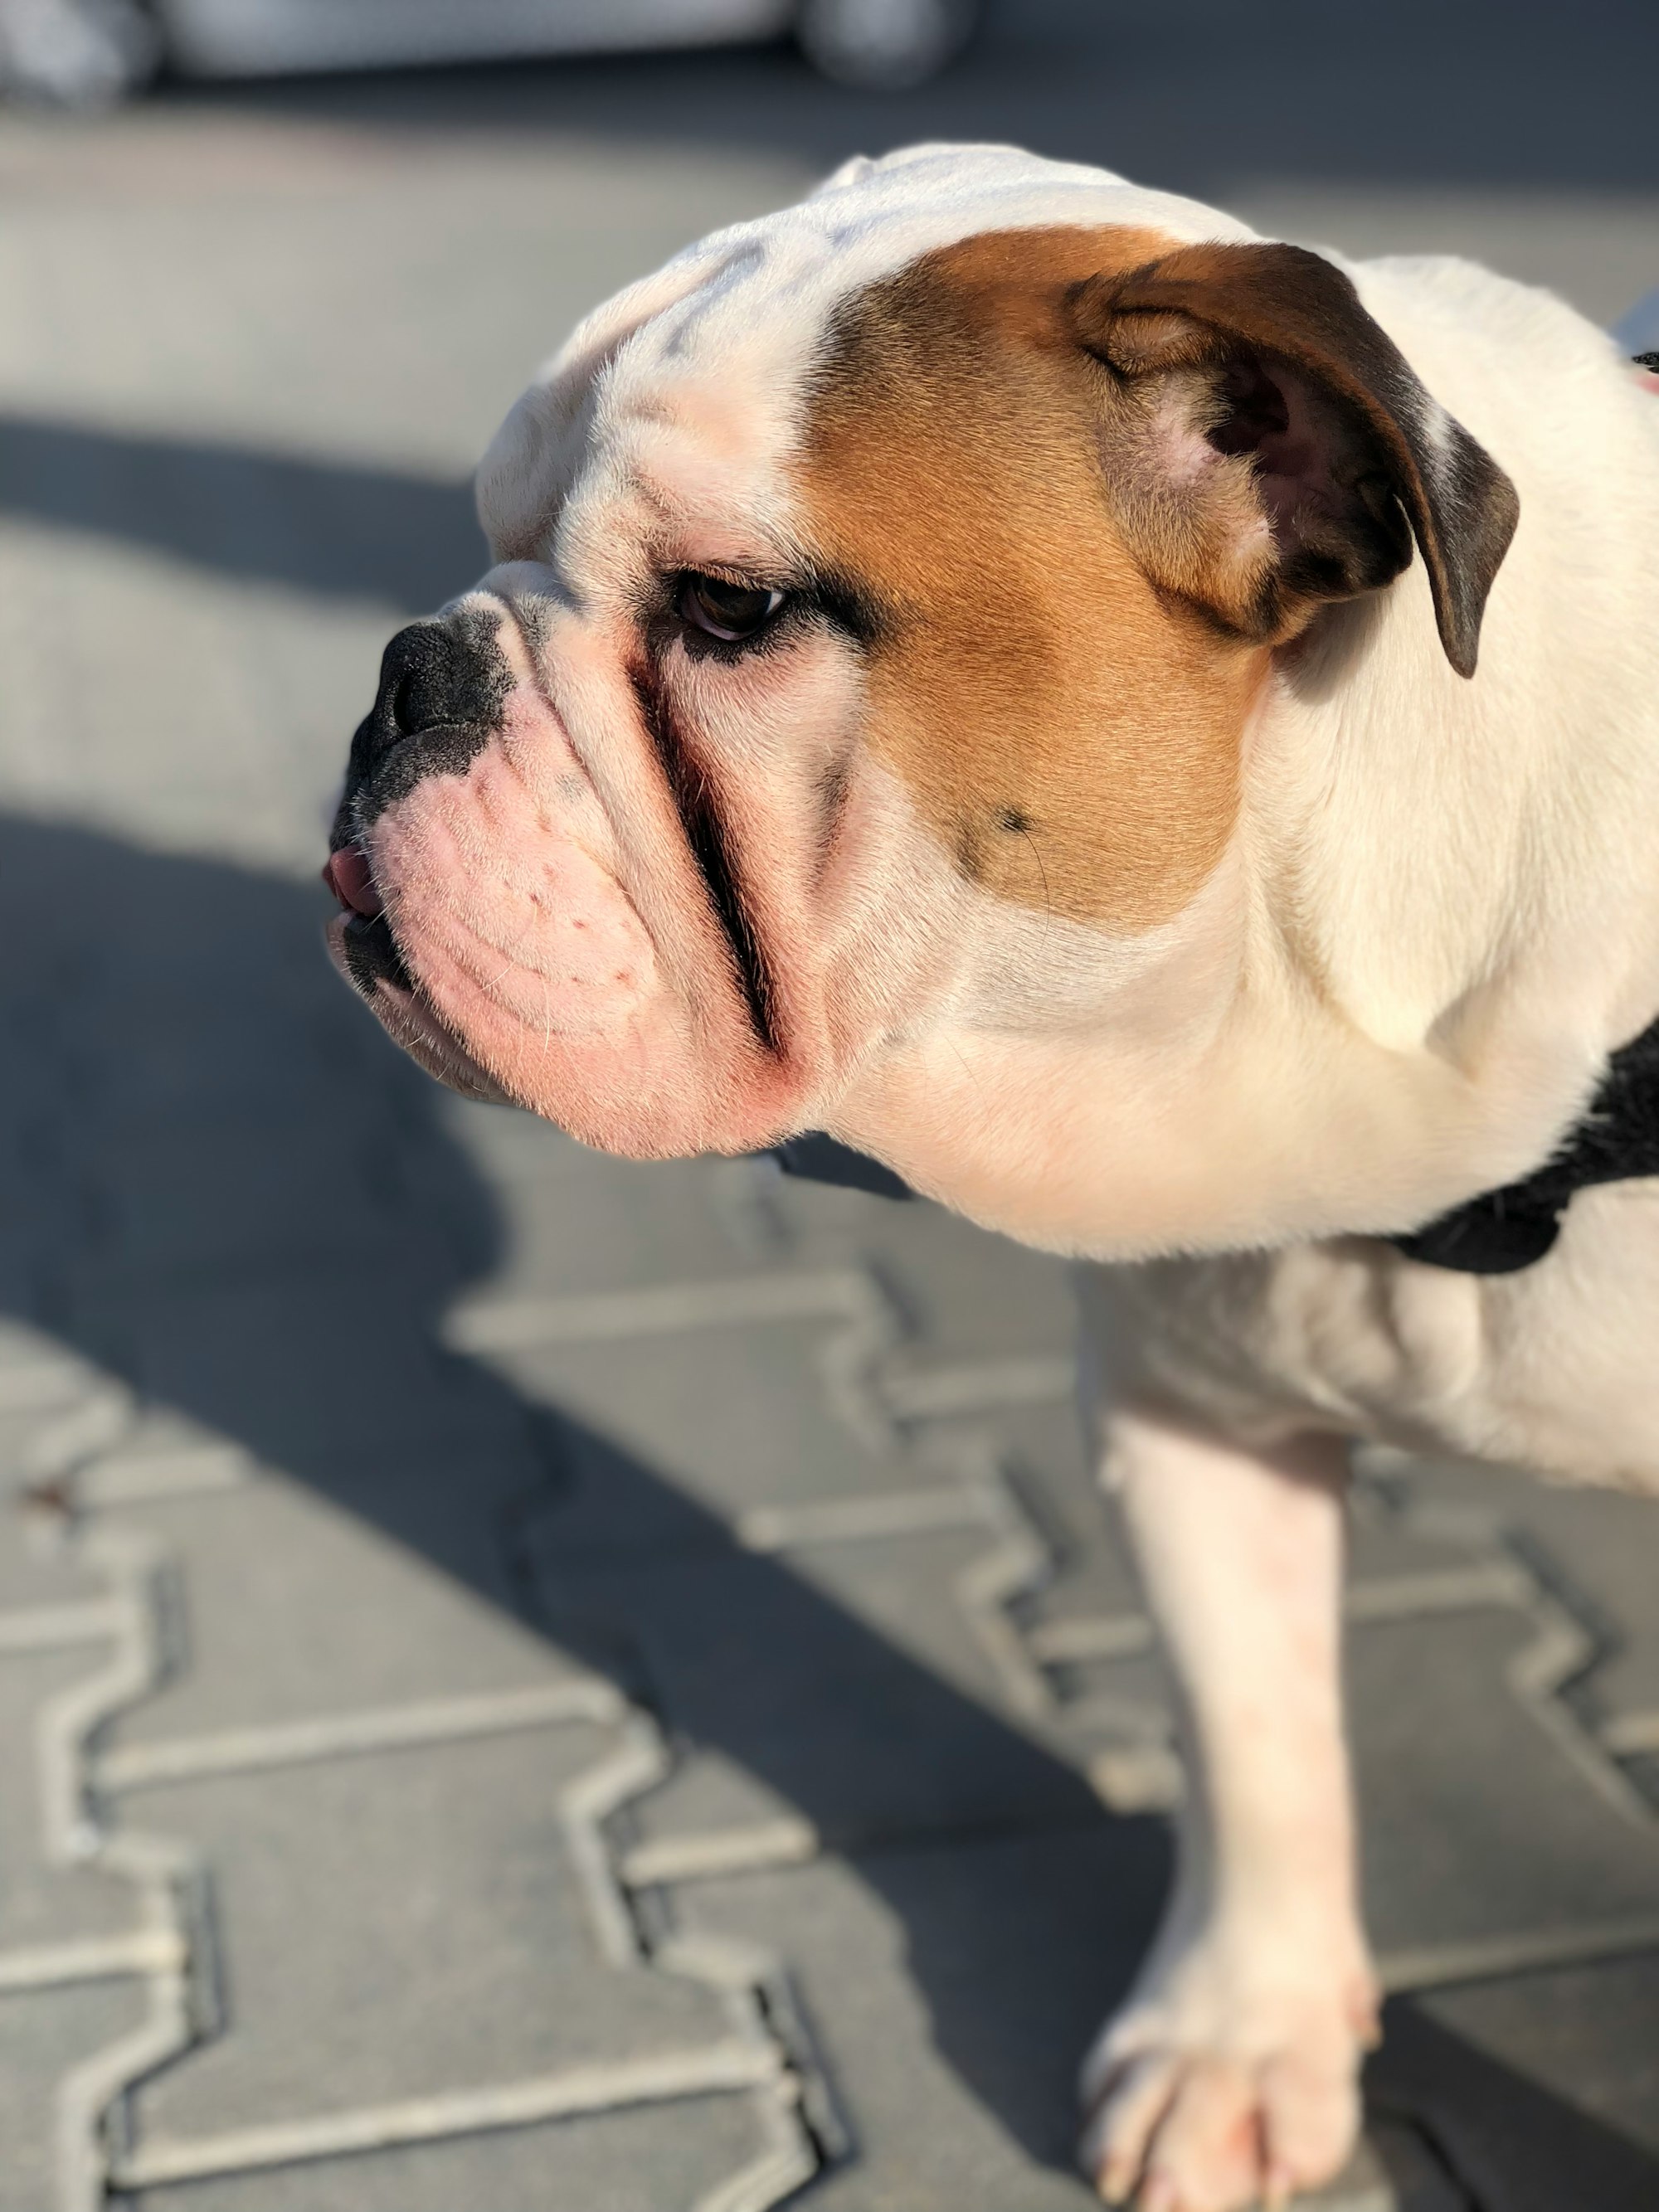 Are American Bulldogs Good Family Dogs?